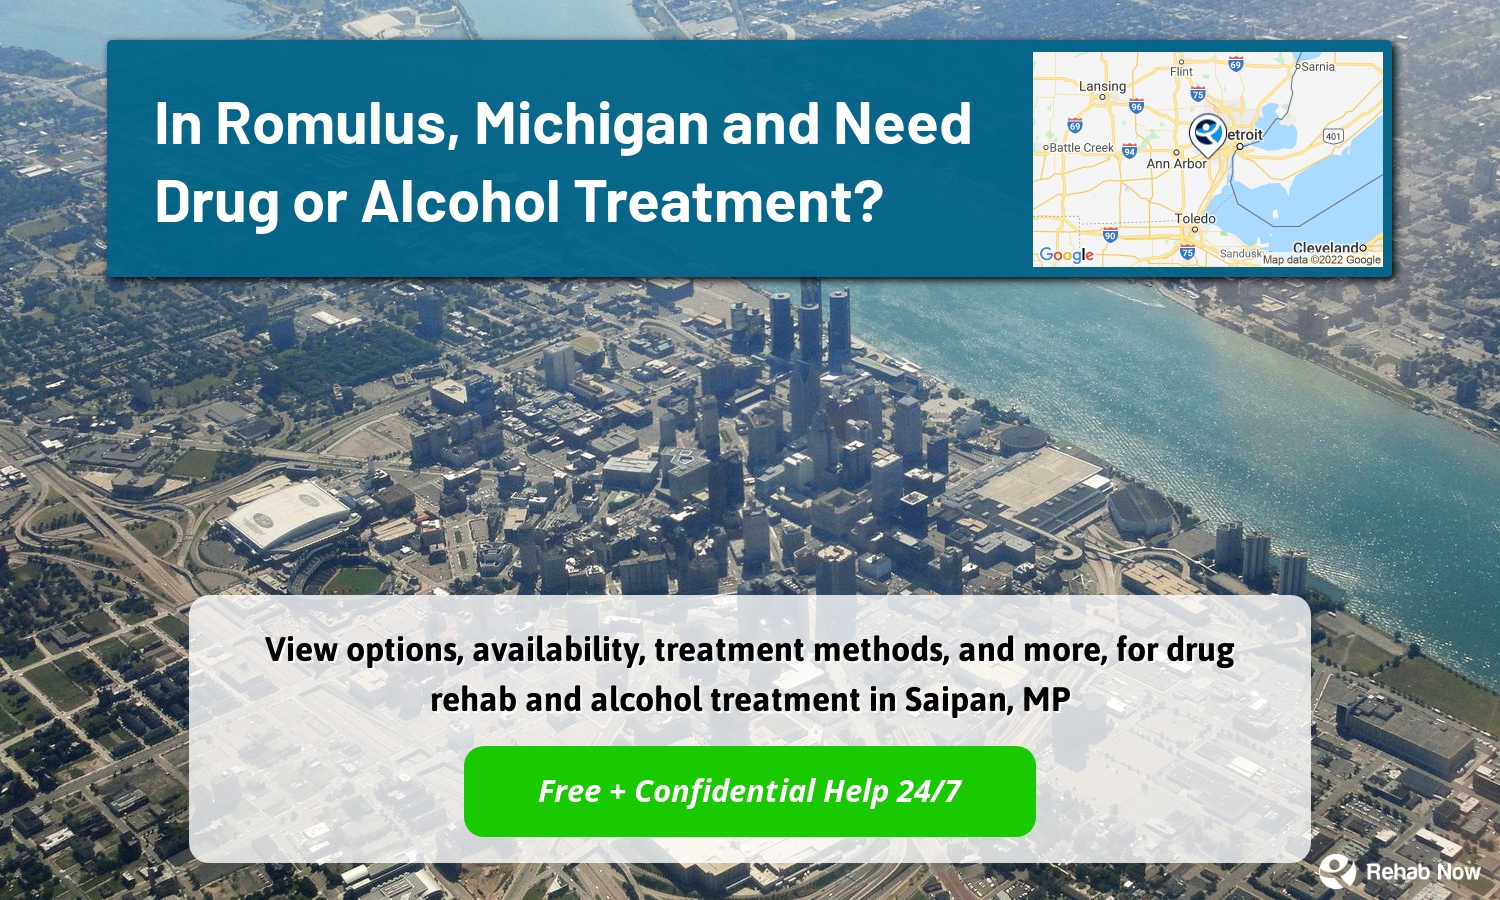 View options, availability, treatment methods, and more, for drug rehab and alcohol treatment in Saipan, MP